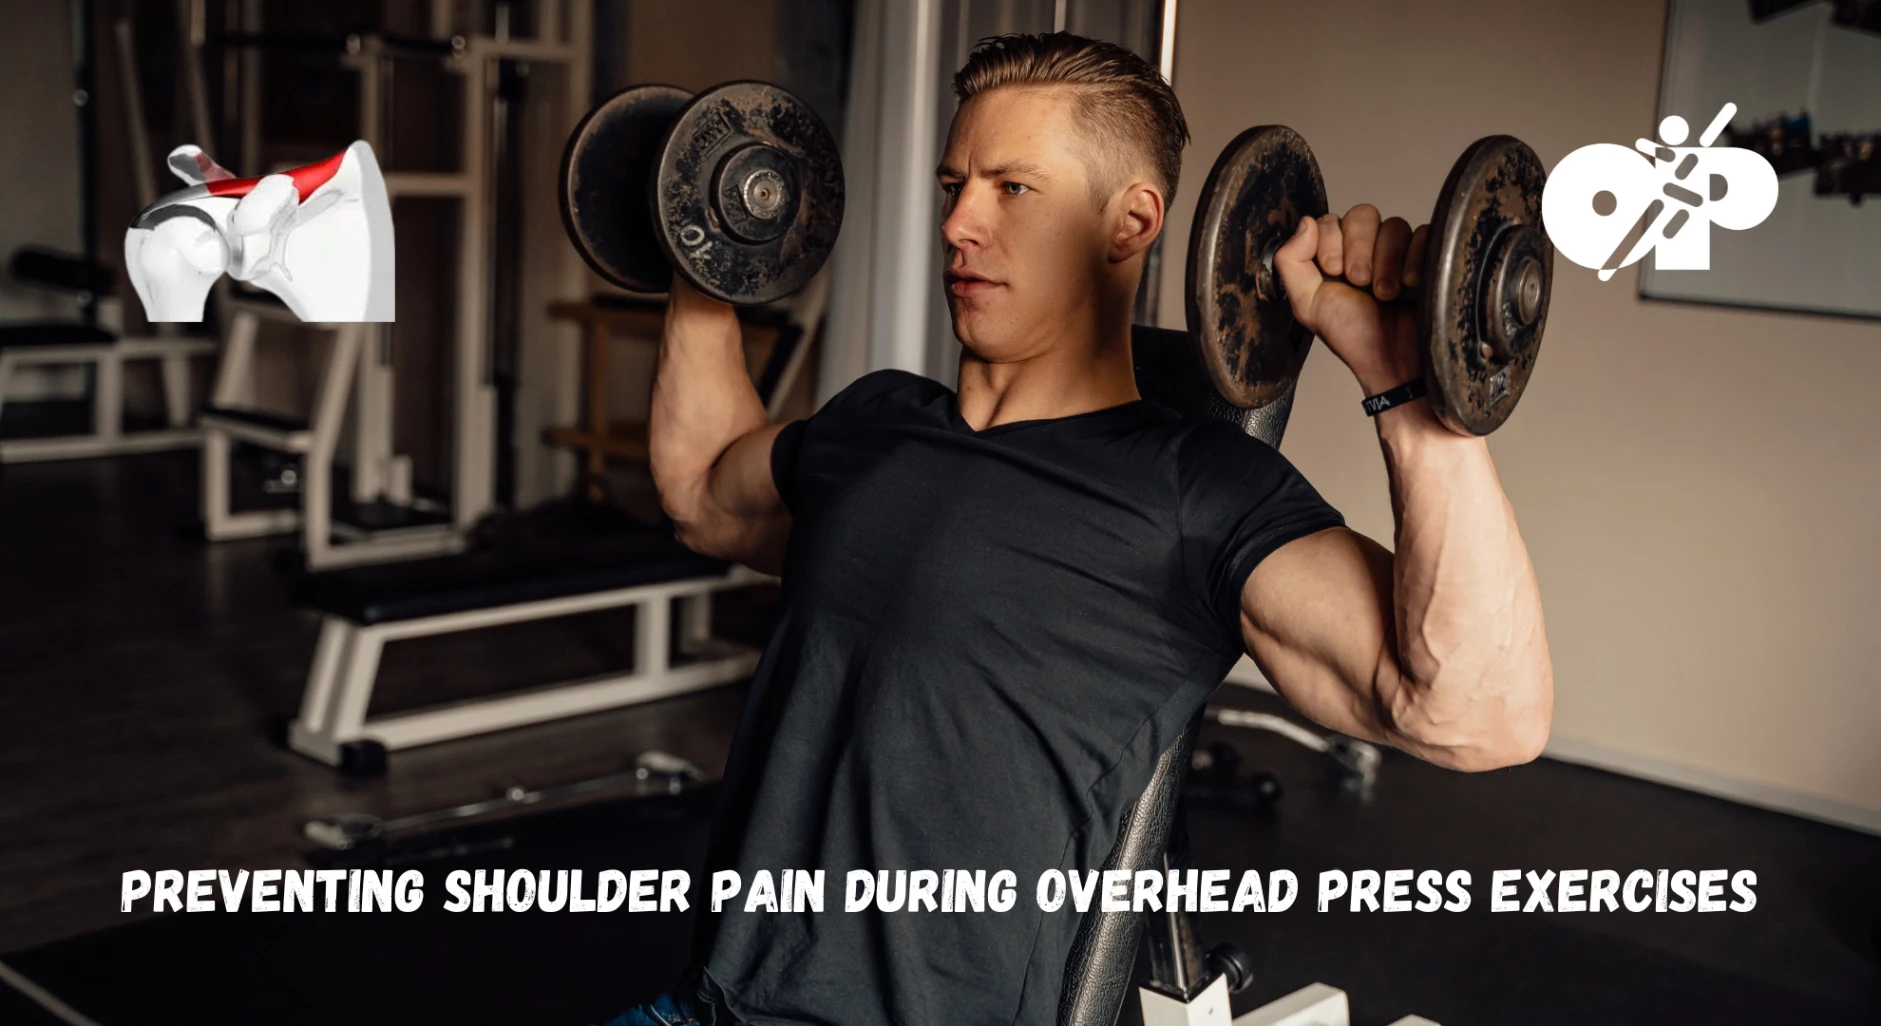 16. Preventing Shoulder Pain During Overhead Press Exercises